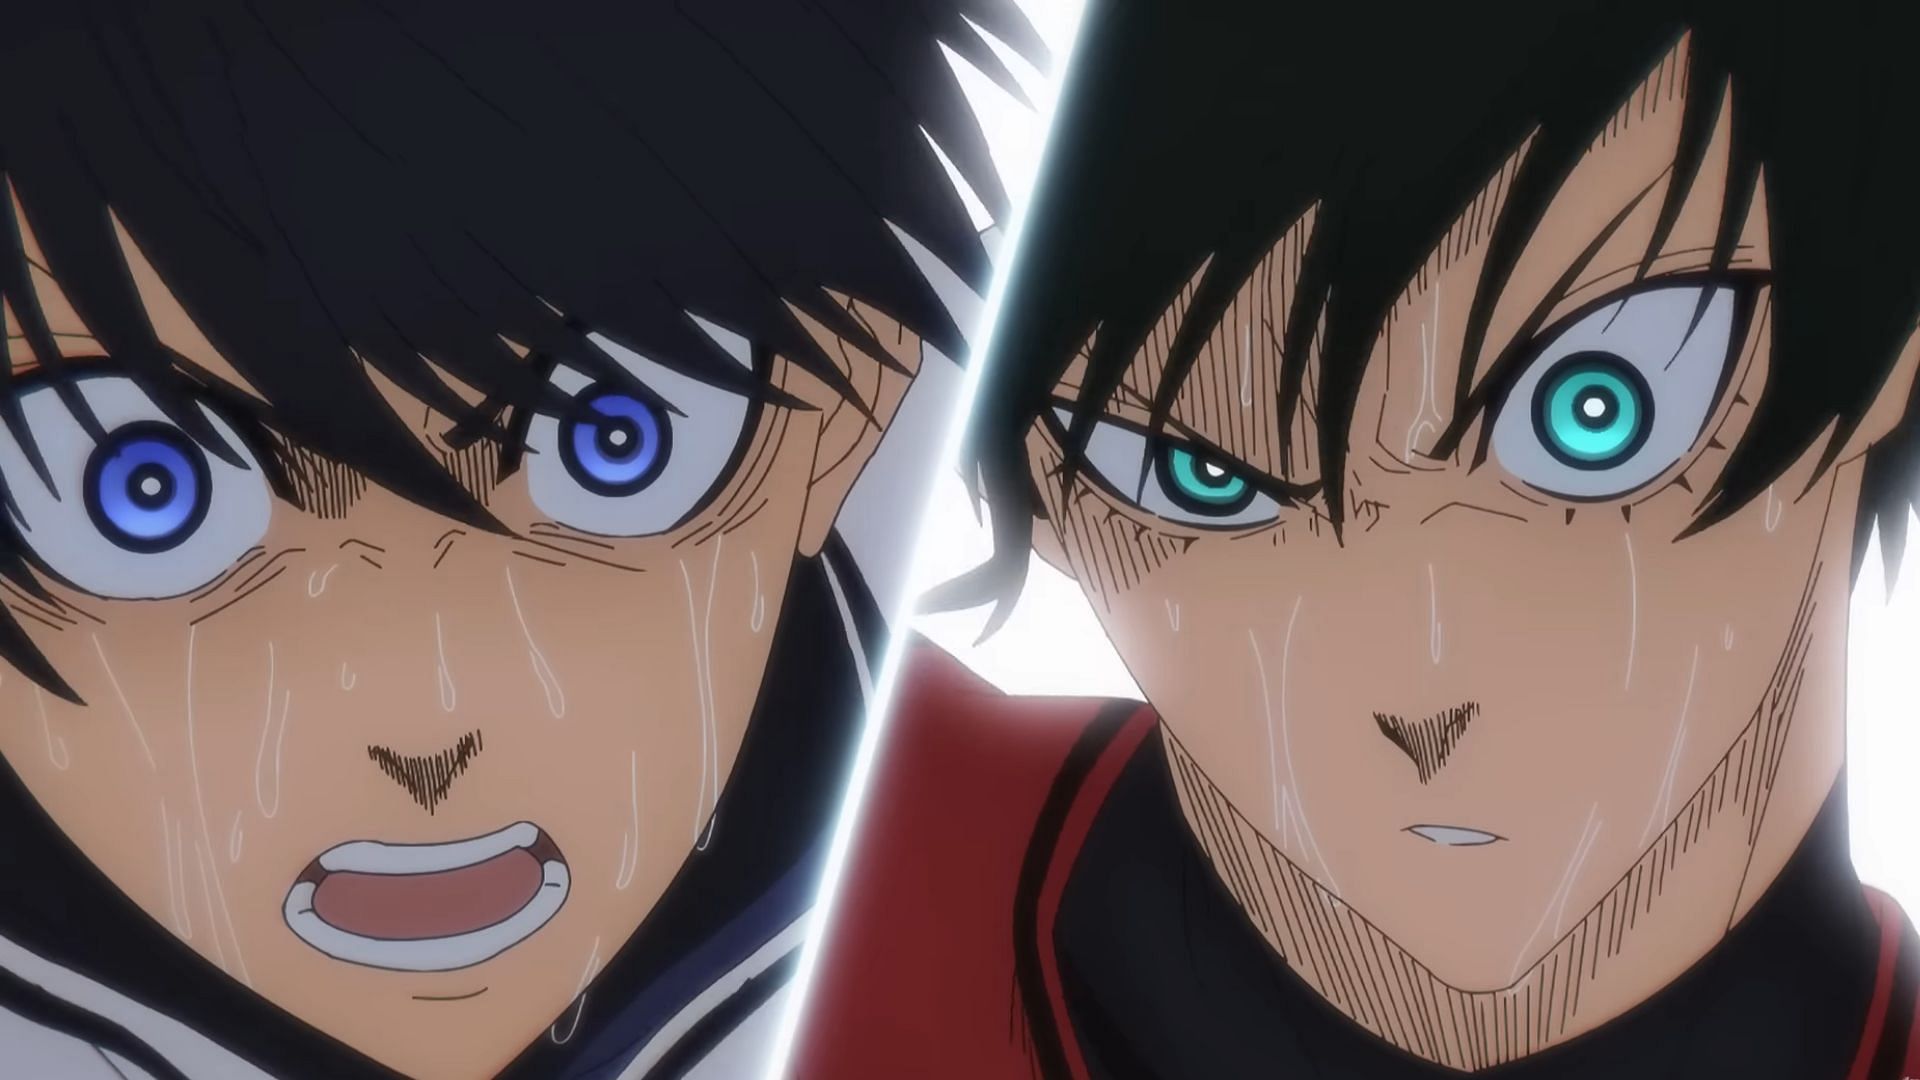 Blue Lock Episode 22 Review: Victory Not Guaranteed